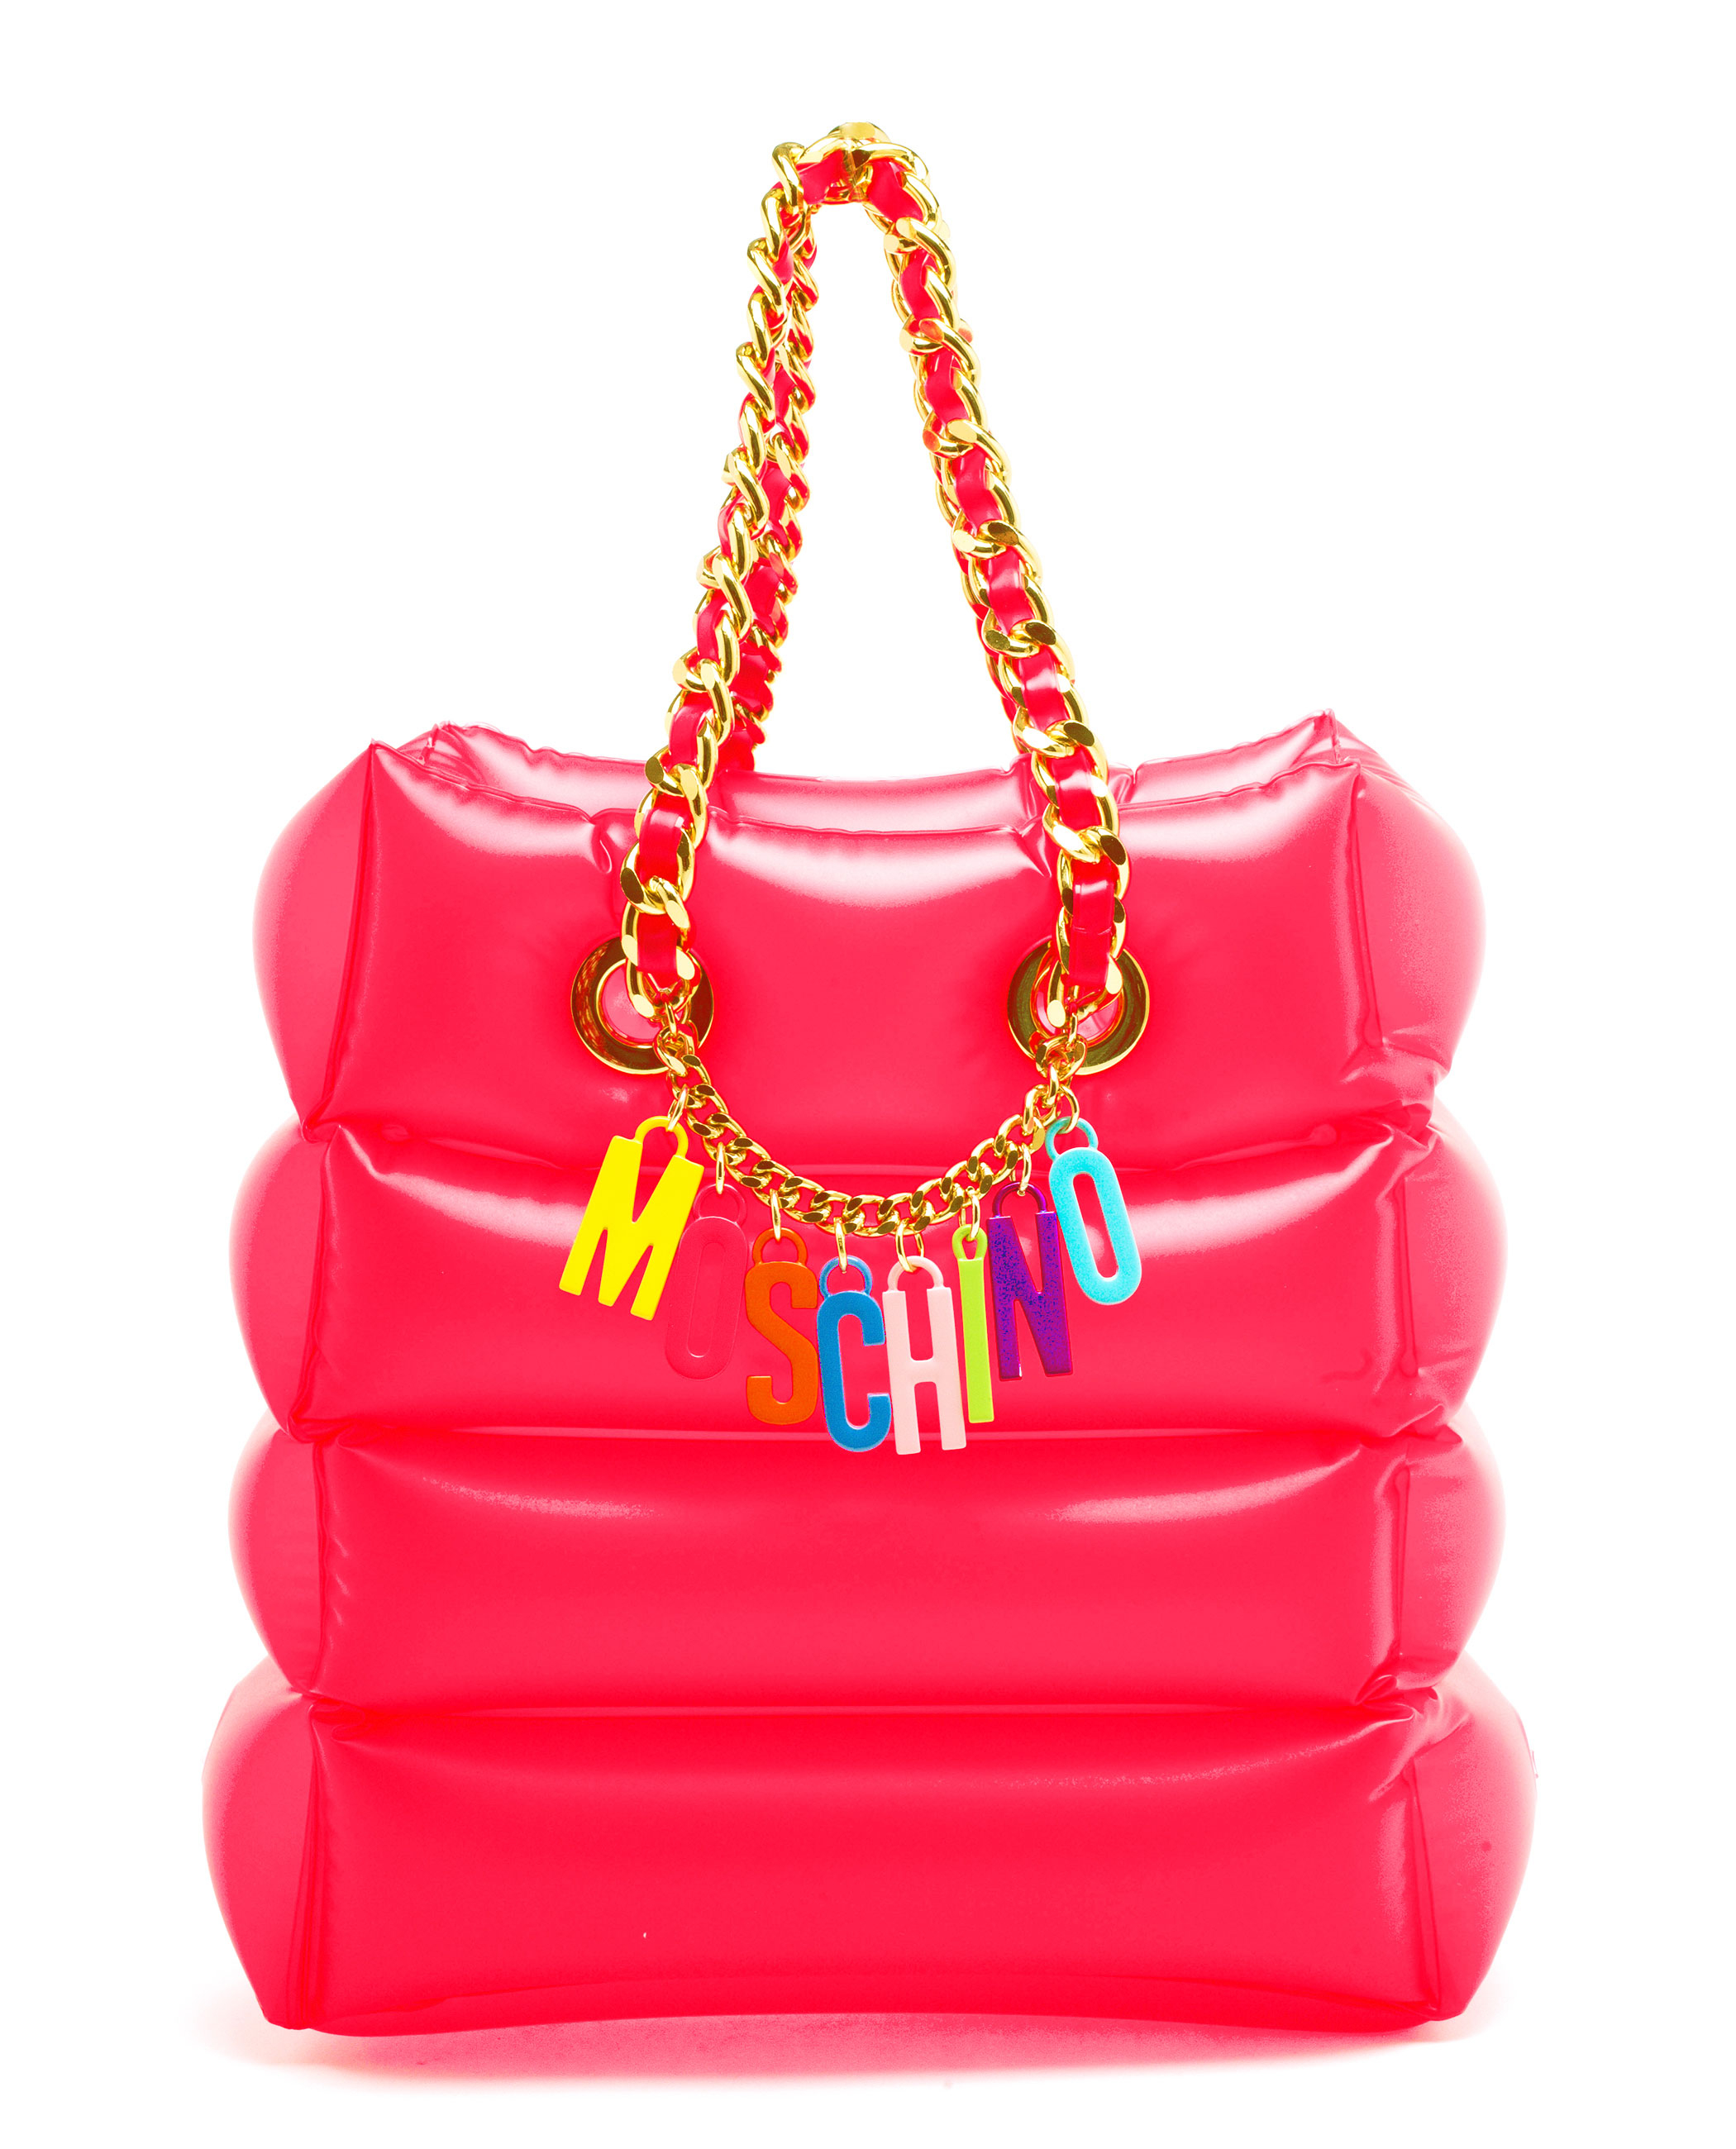 Moschino Inflatable Shoulder Bag in 